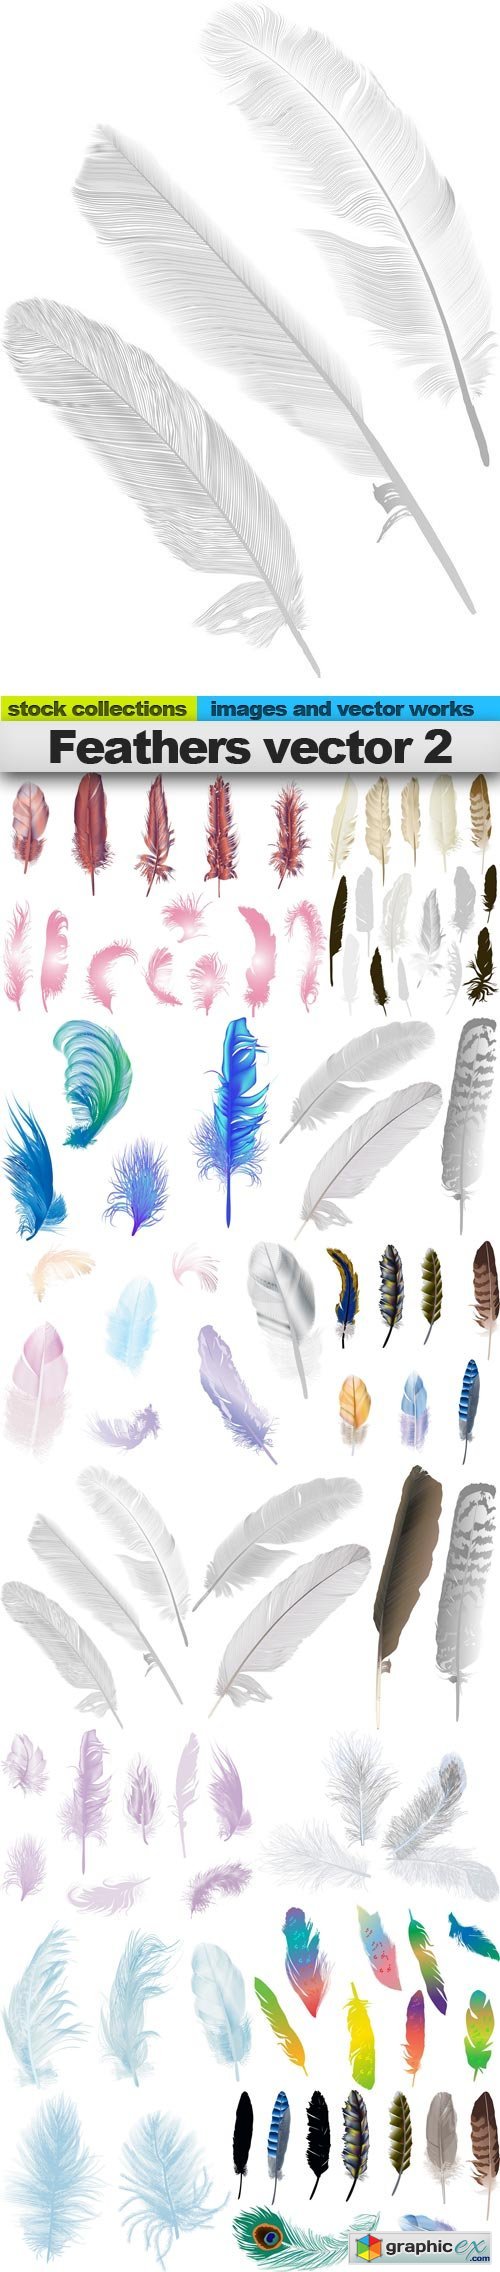 Feathers vector 2, 15 x EPS